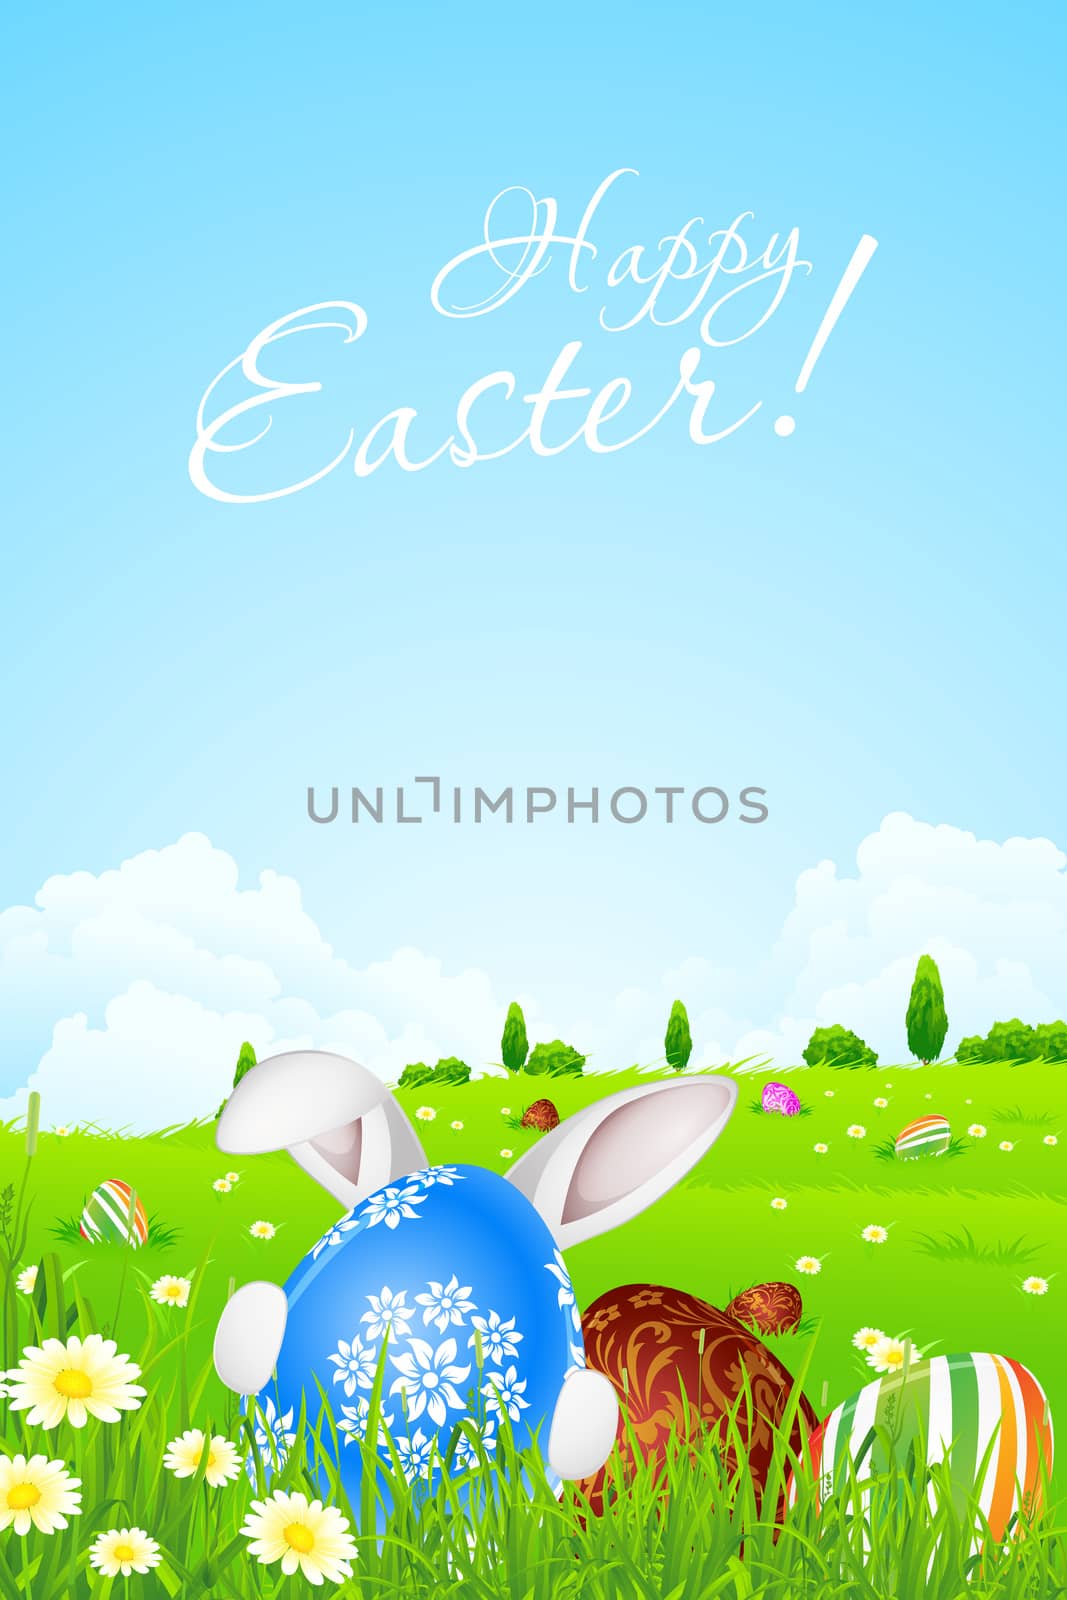 Green Landscape Background with Easter Eggs and Rabbit